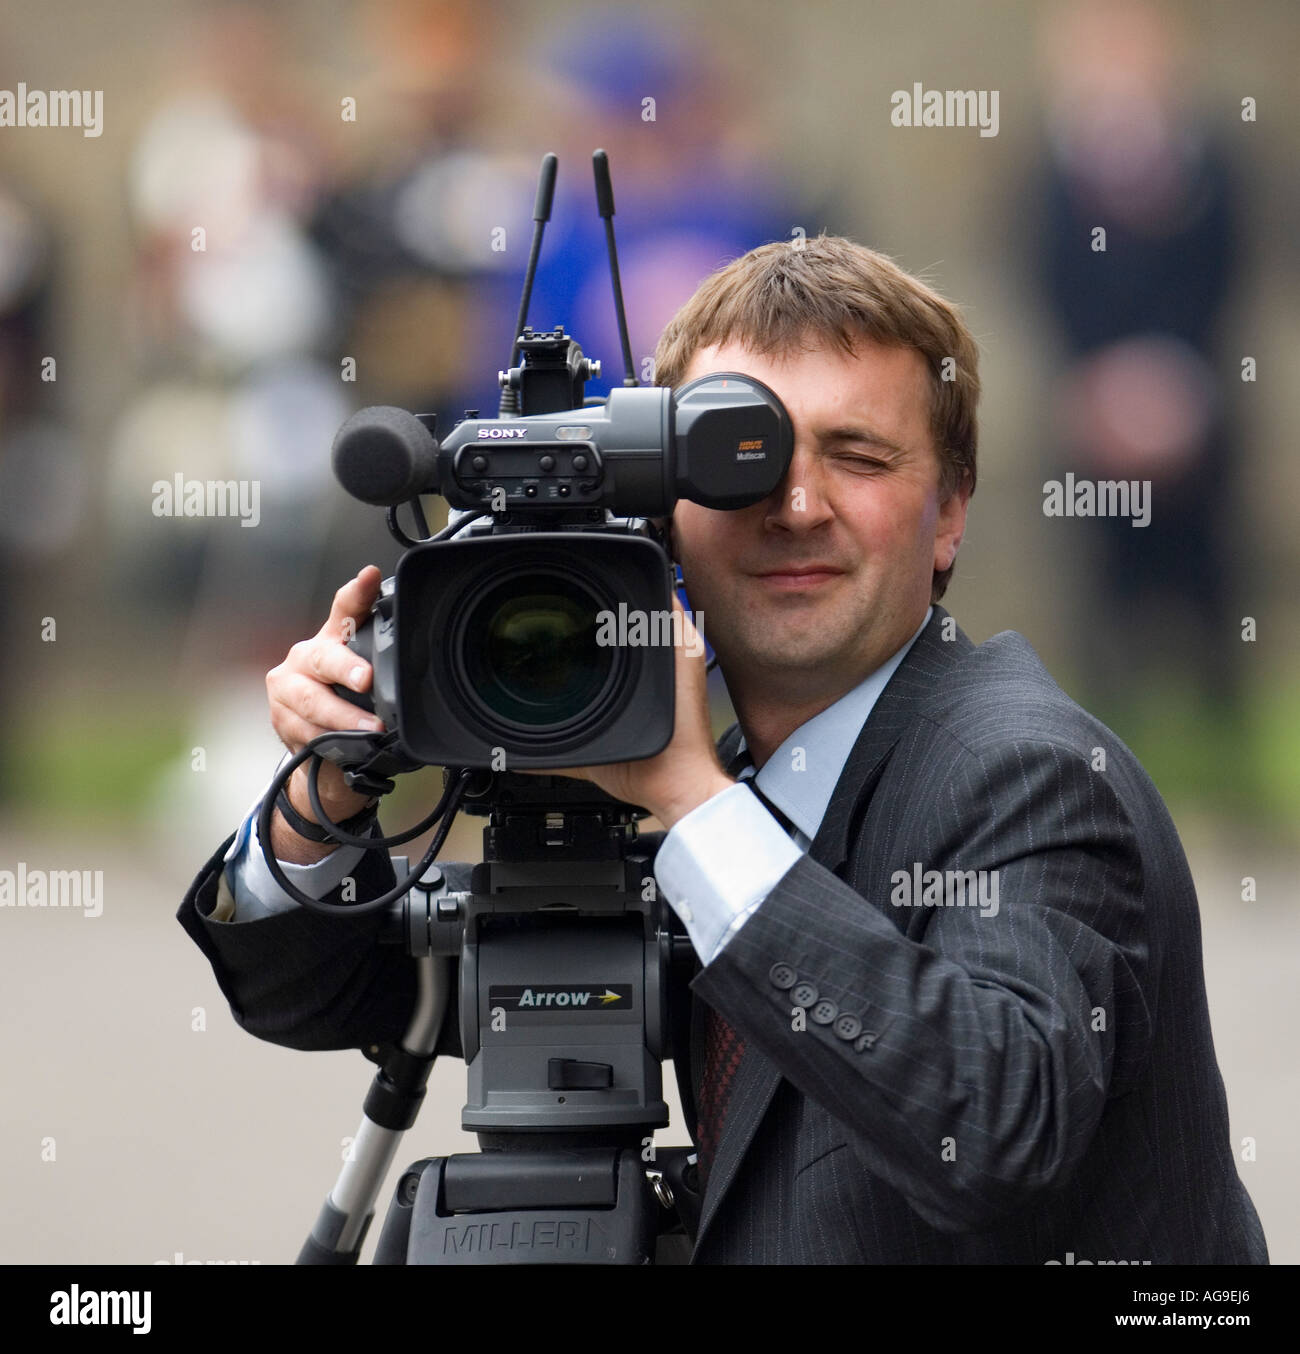 Cameraman wearing a suit looking through the viewfinder at outdoors event  Stock Photo - Alamy